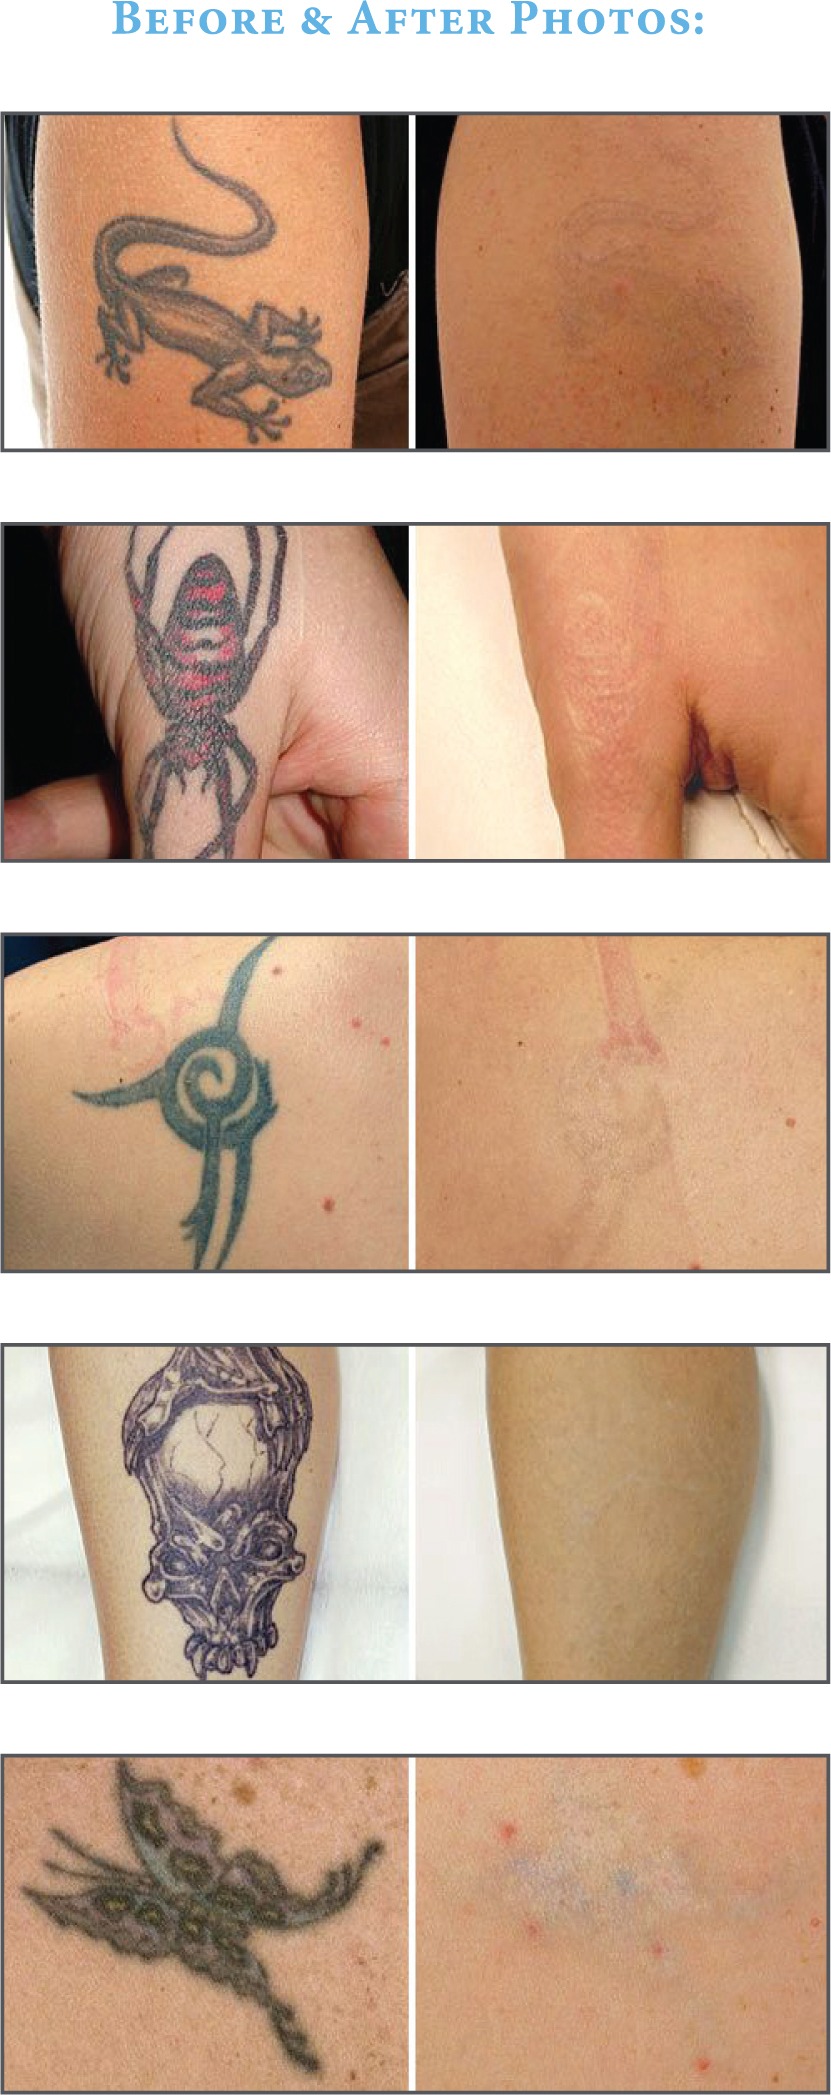 ClearSteps Laser Tattoo Removal Los Angeles California